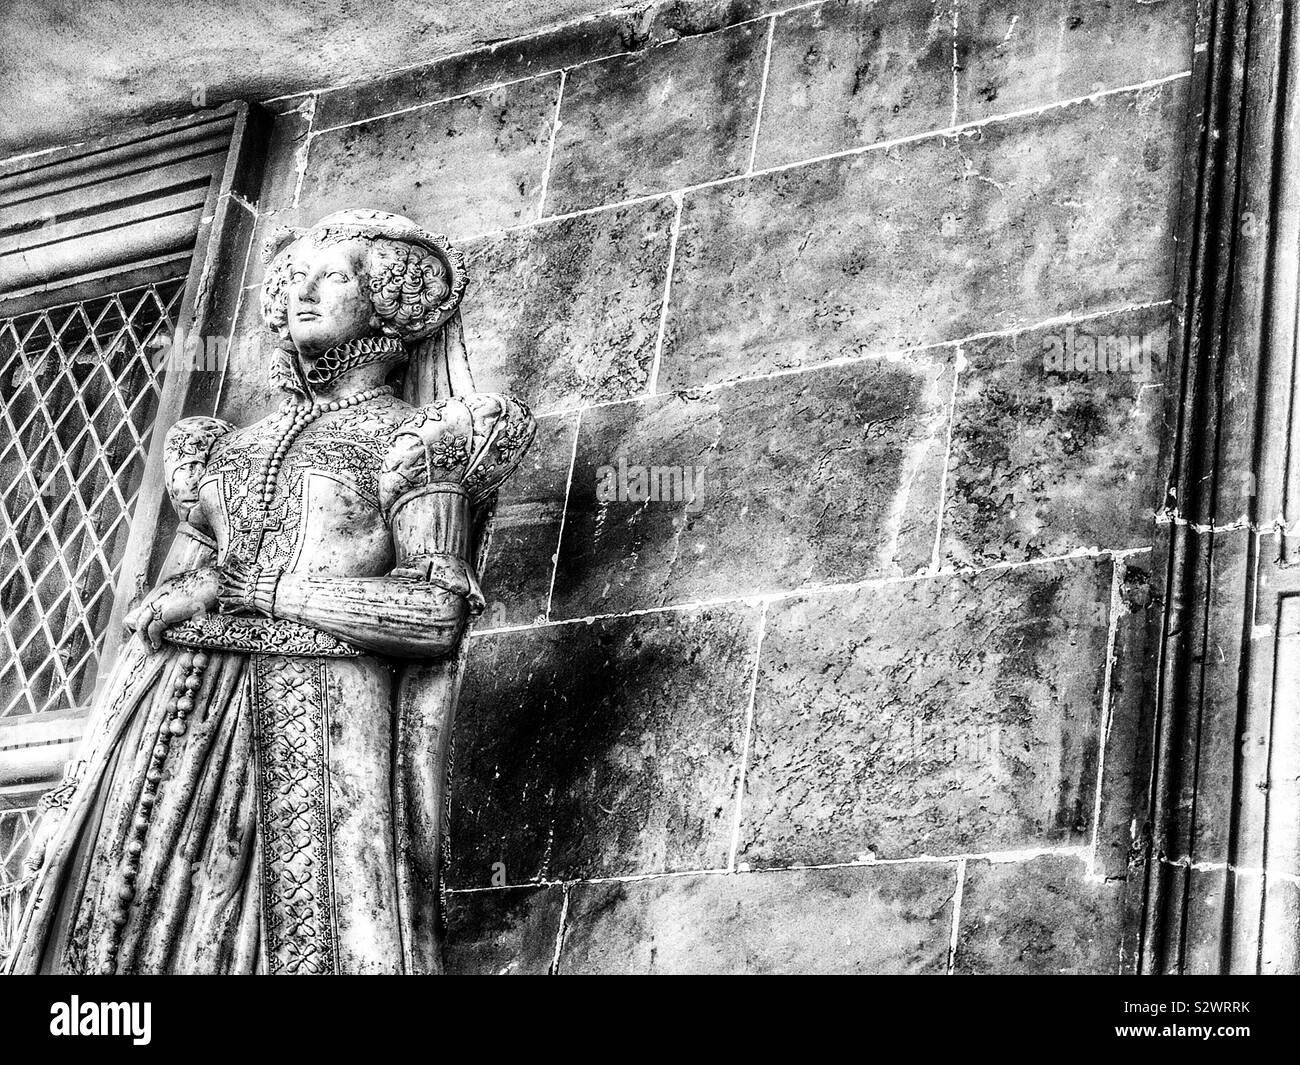 Black and white image of stone sculpture of Mary Queen of Scots, Hardwick Hall, Derbyshire, England. 1822 statue by Sir Richard Westmacott Stock Photo